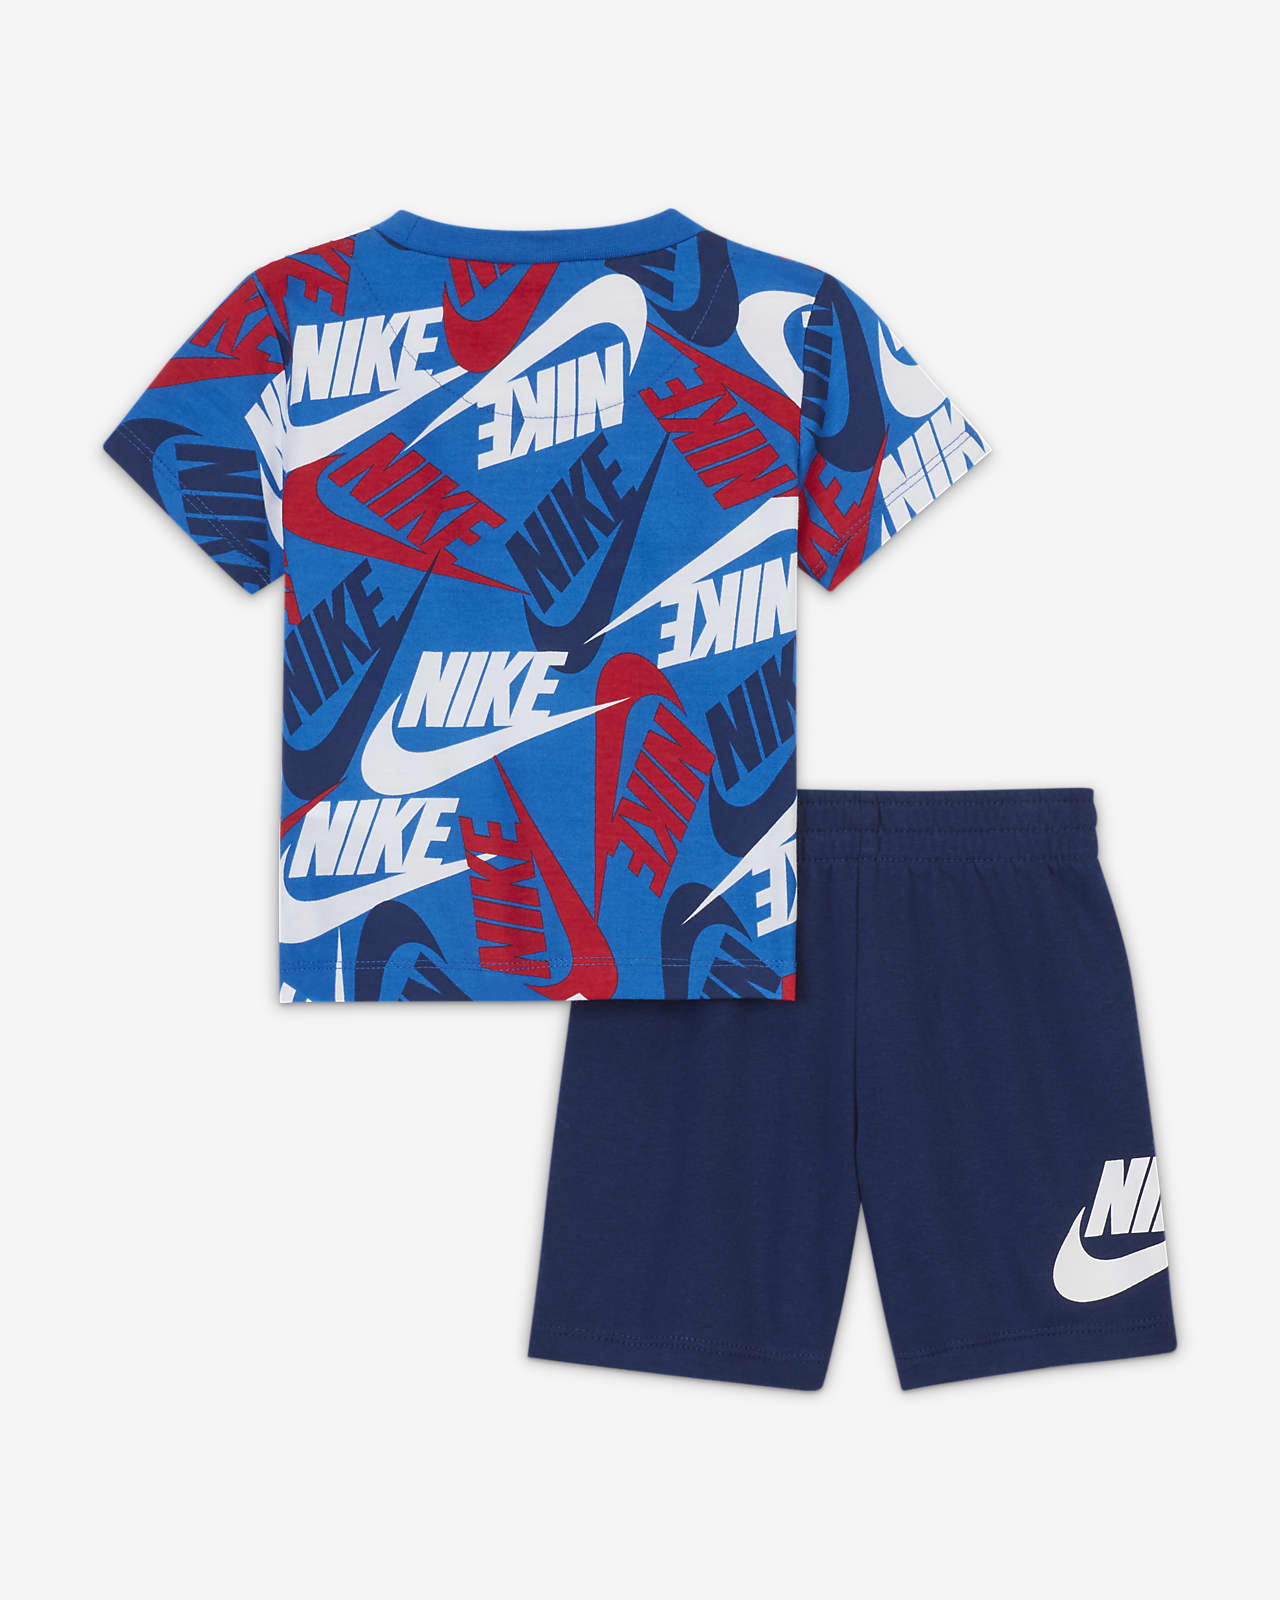 Modtagelig for Hound fest Nike Sportswear Baby (12-24M) T-Shirt and Shorts Set. Nike.com